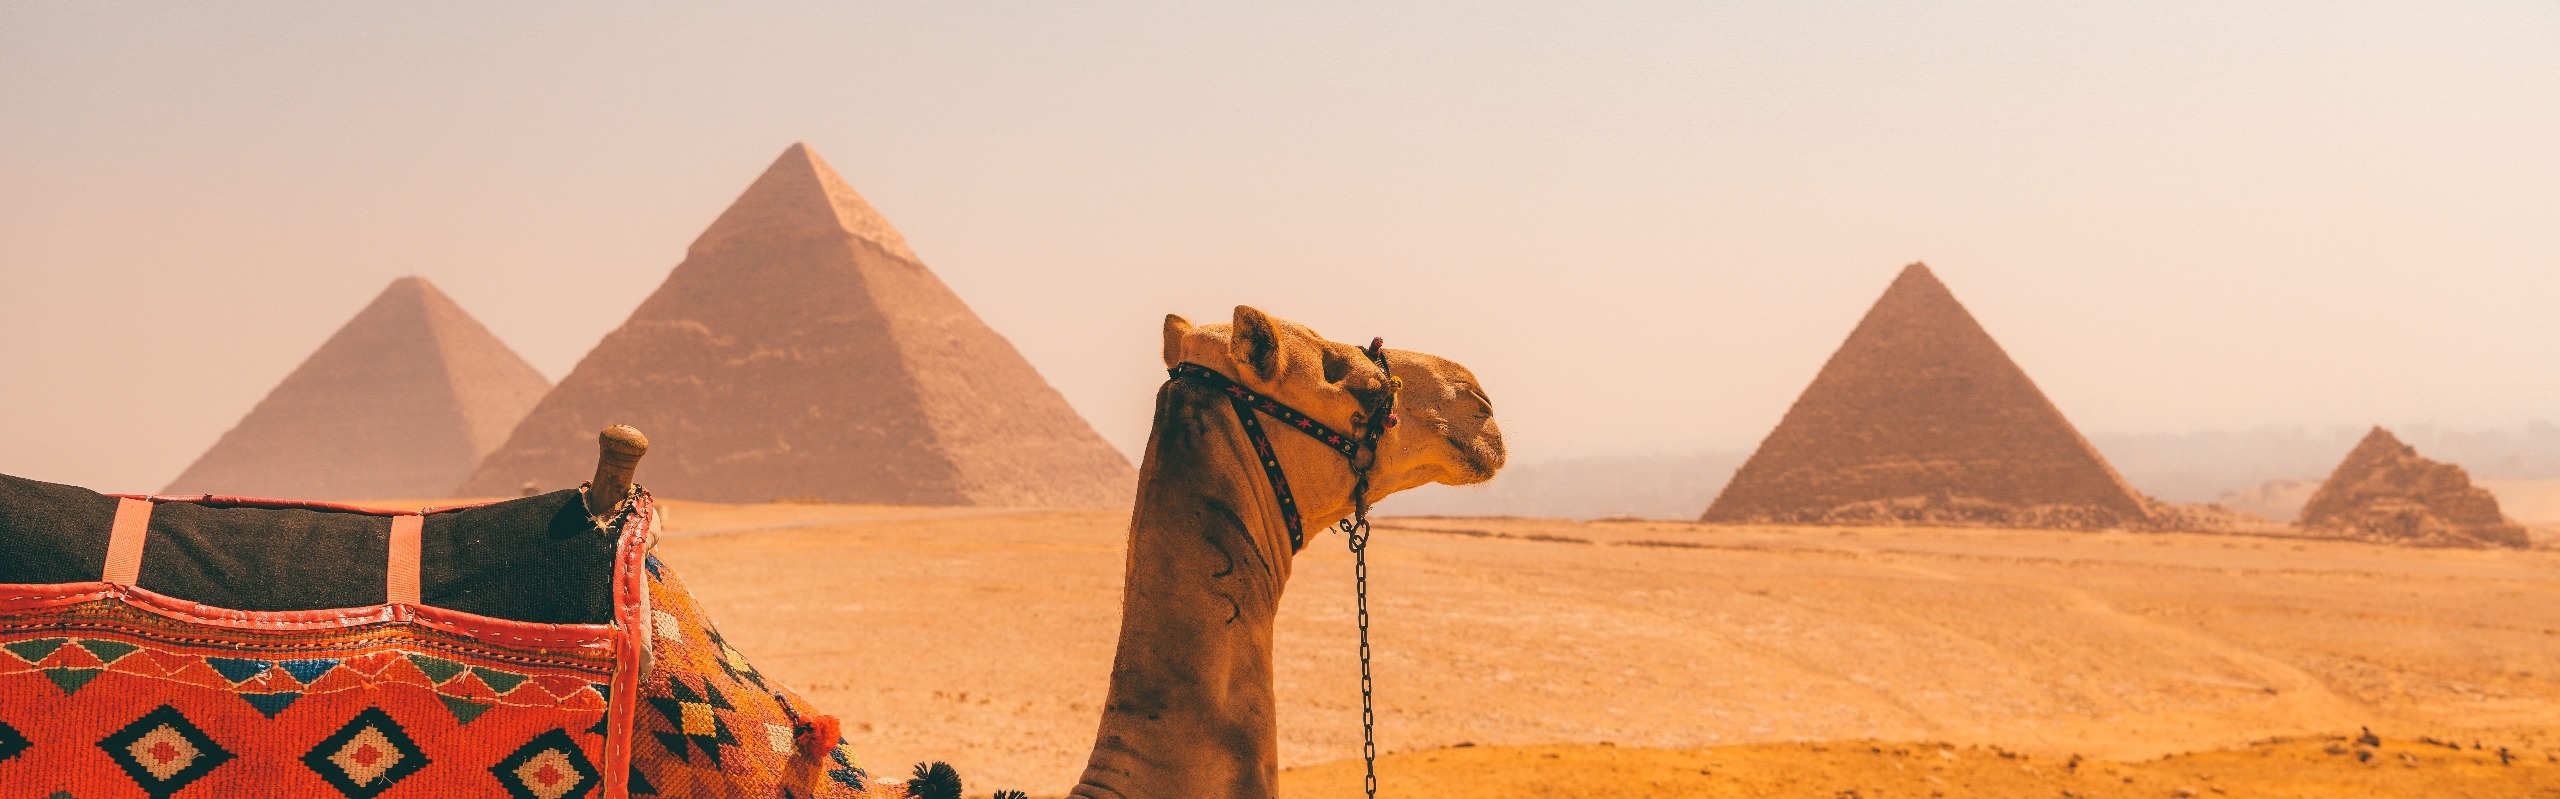 How to Visit the Pyramids of Giza: Top 10 Travel Tips